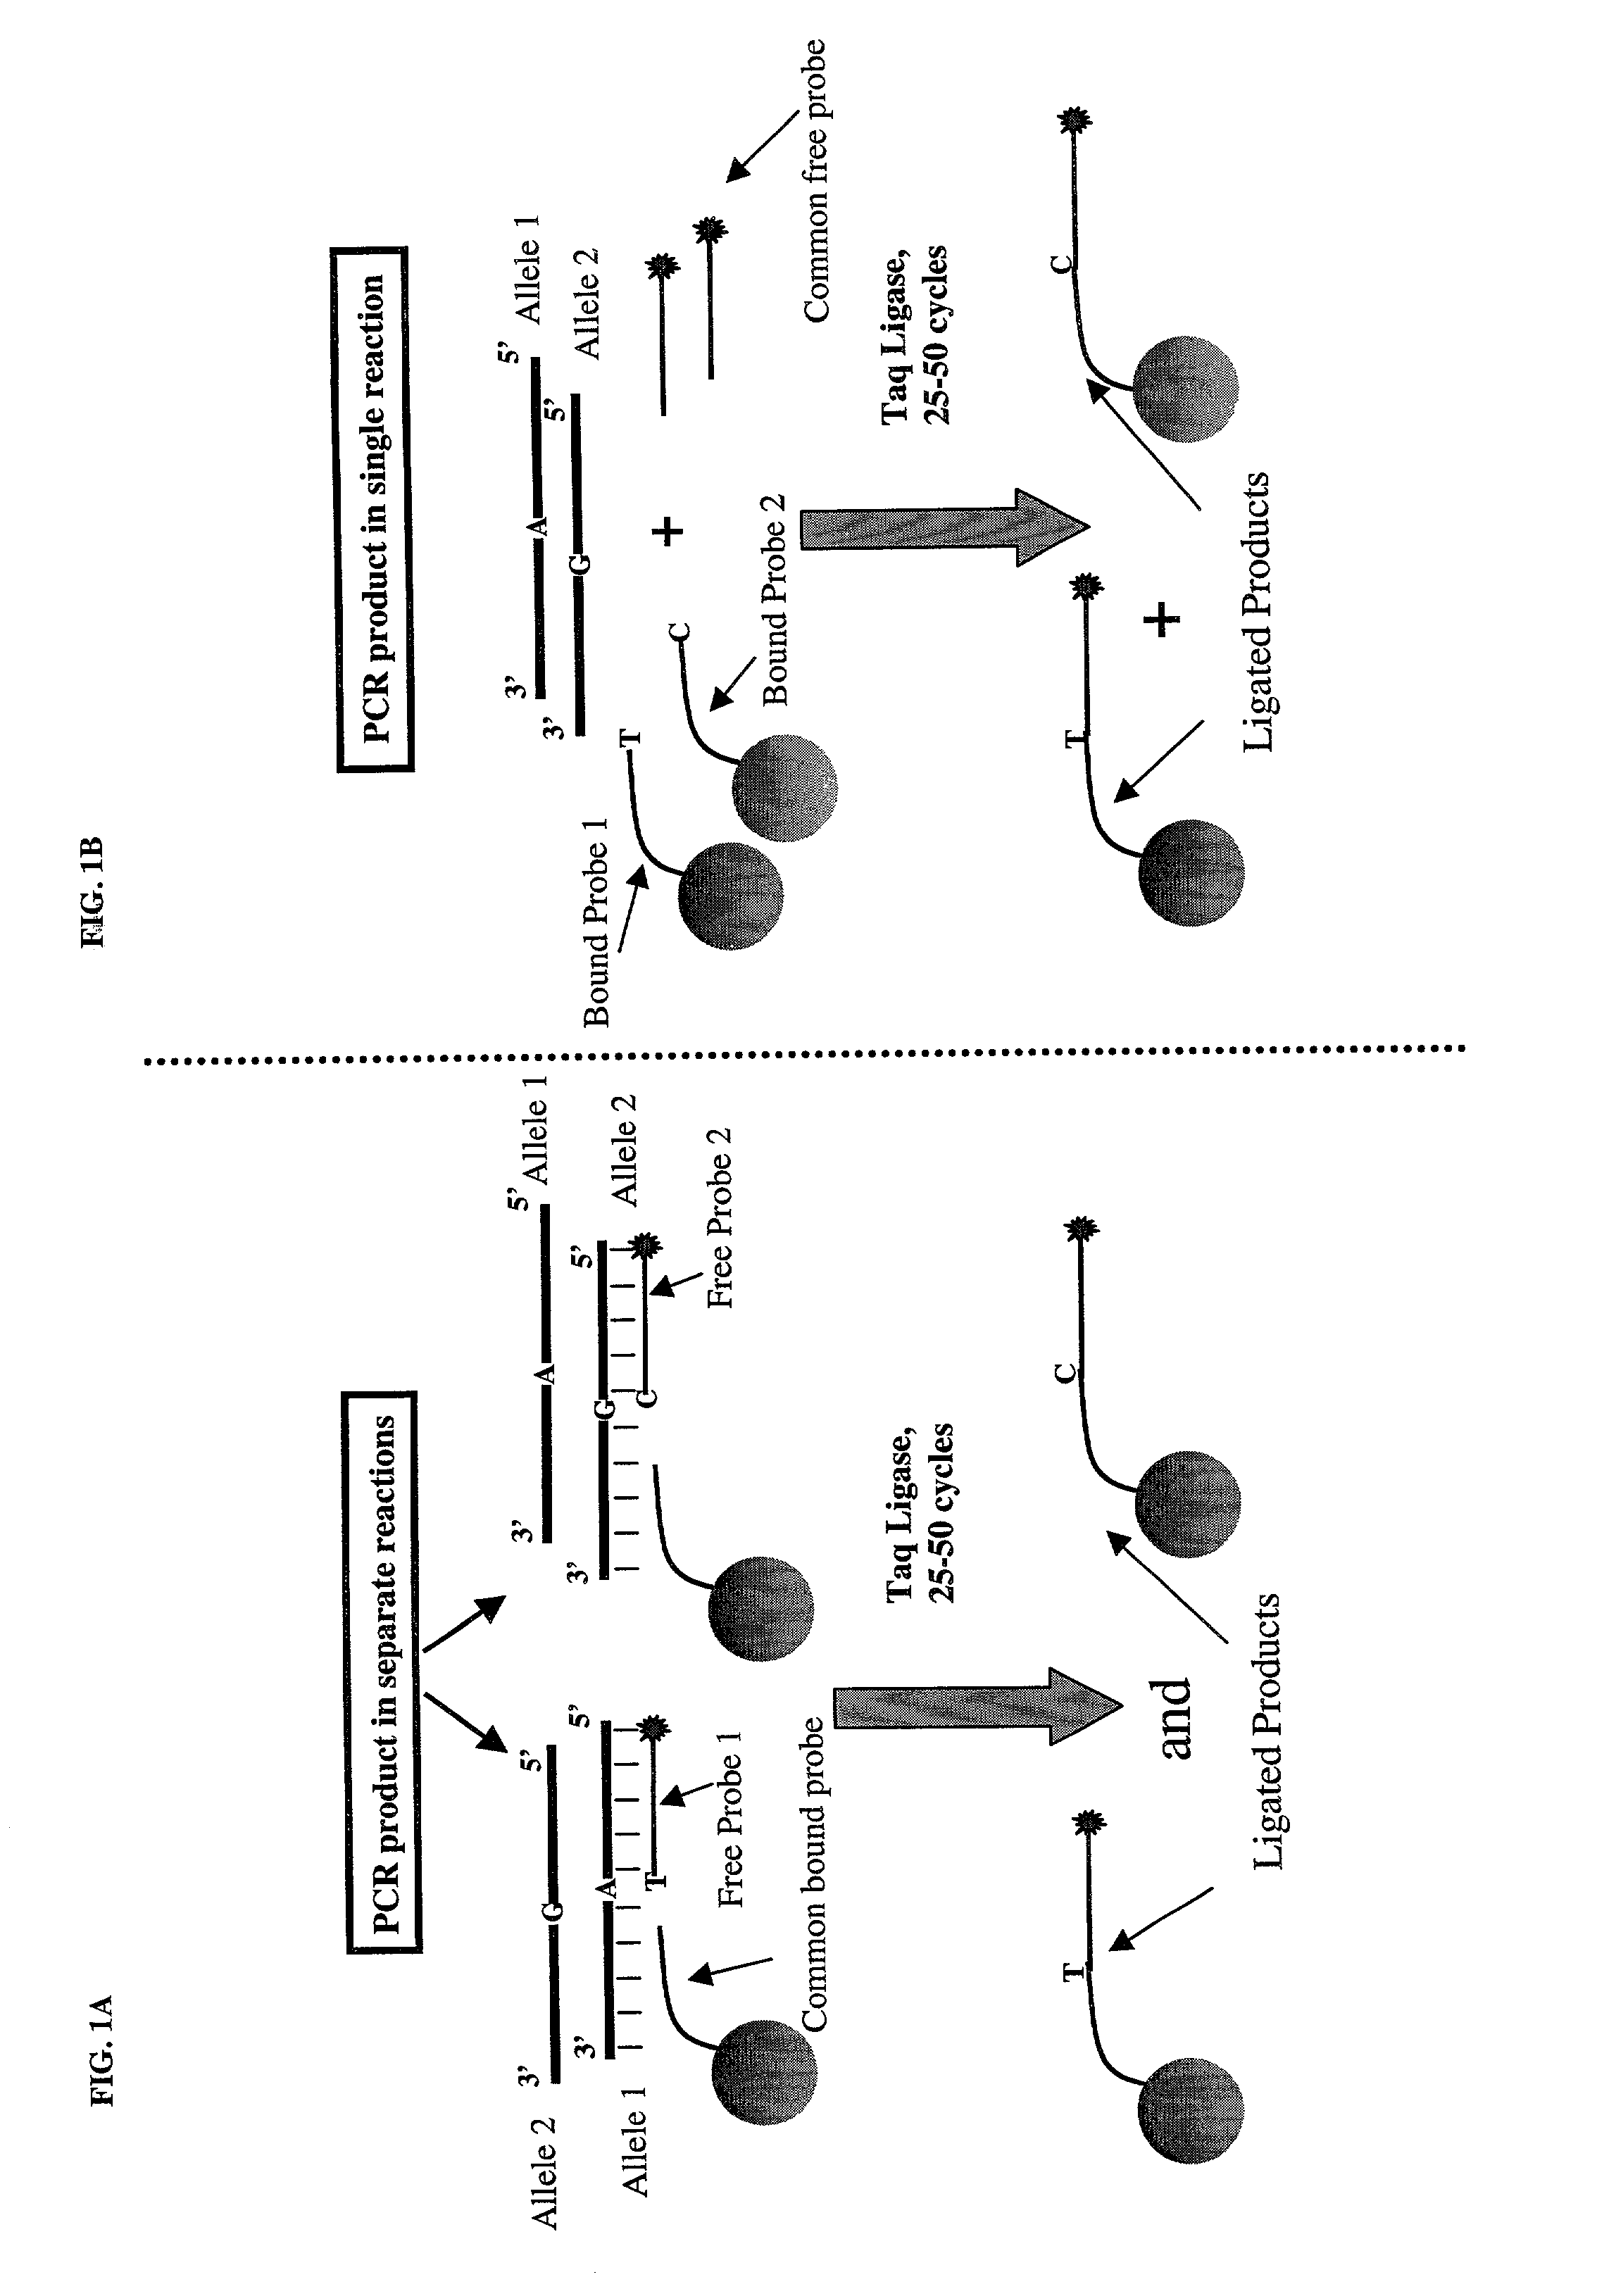 Microsphere based oligonucleotide ligation assays, kits, and methods of use, including high-throughput genotyping